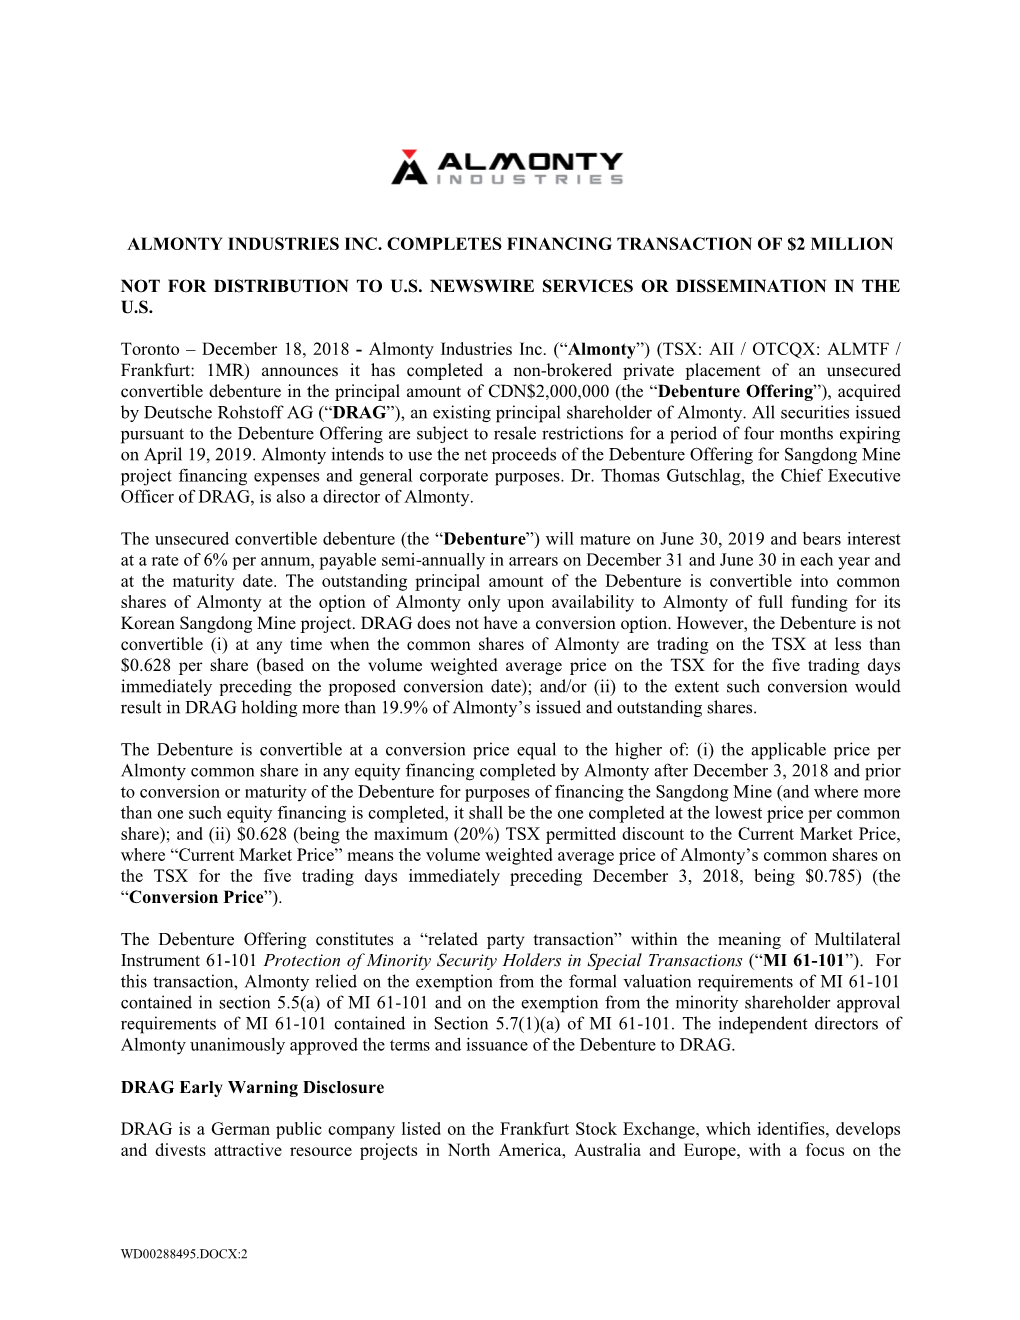 Almonty Industries Inc. Completes Financing Transaction of $2 Million Not for Distribution to U.S. Newswire Services Or Dissemin